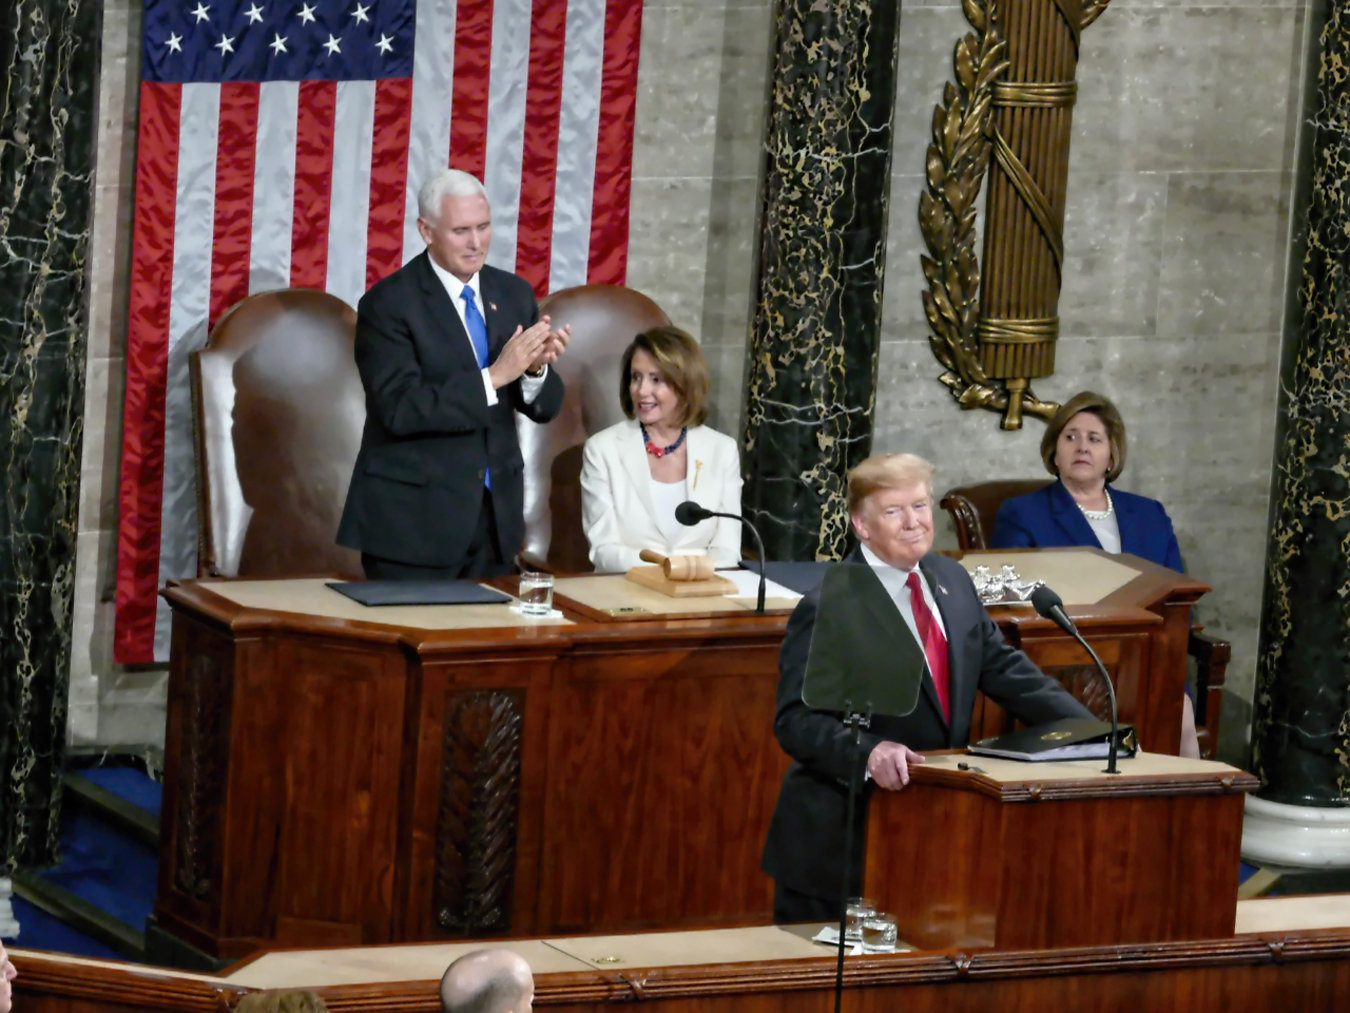 During the State of the Union address in February, Nancy Pelosi, Speaker of the House, sits out an applause line as Vice President Pence rises in support of many of the President’s agenda priorities including building a wall to prevent illegal immigration, limiting late term abortions, and defending America against Socialism.